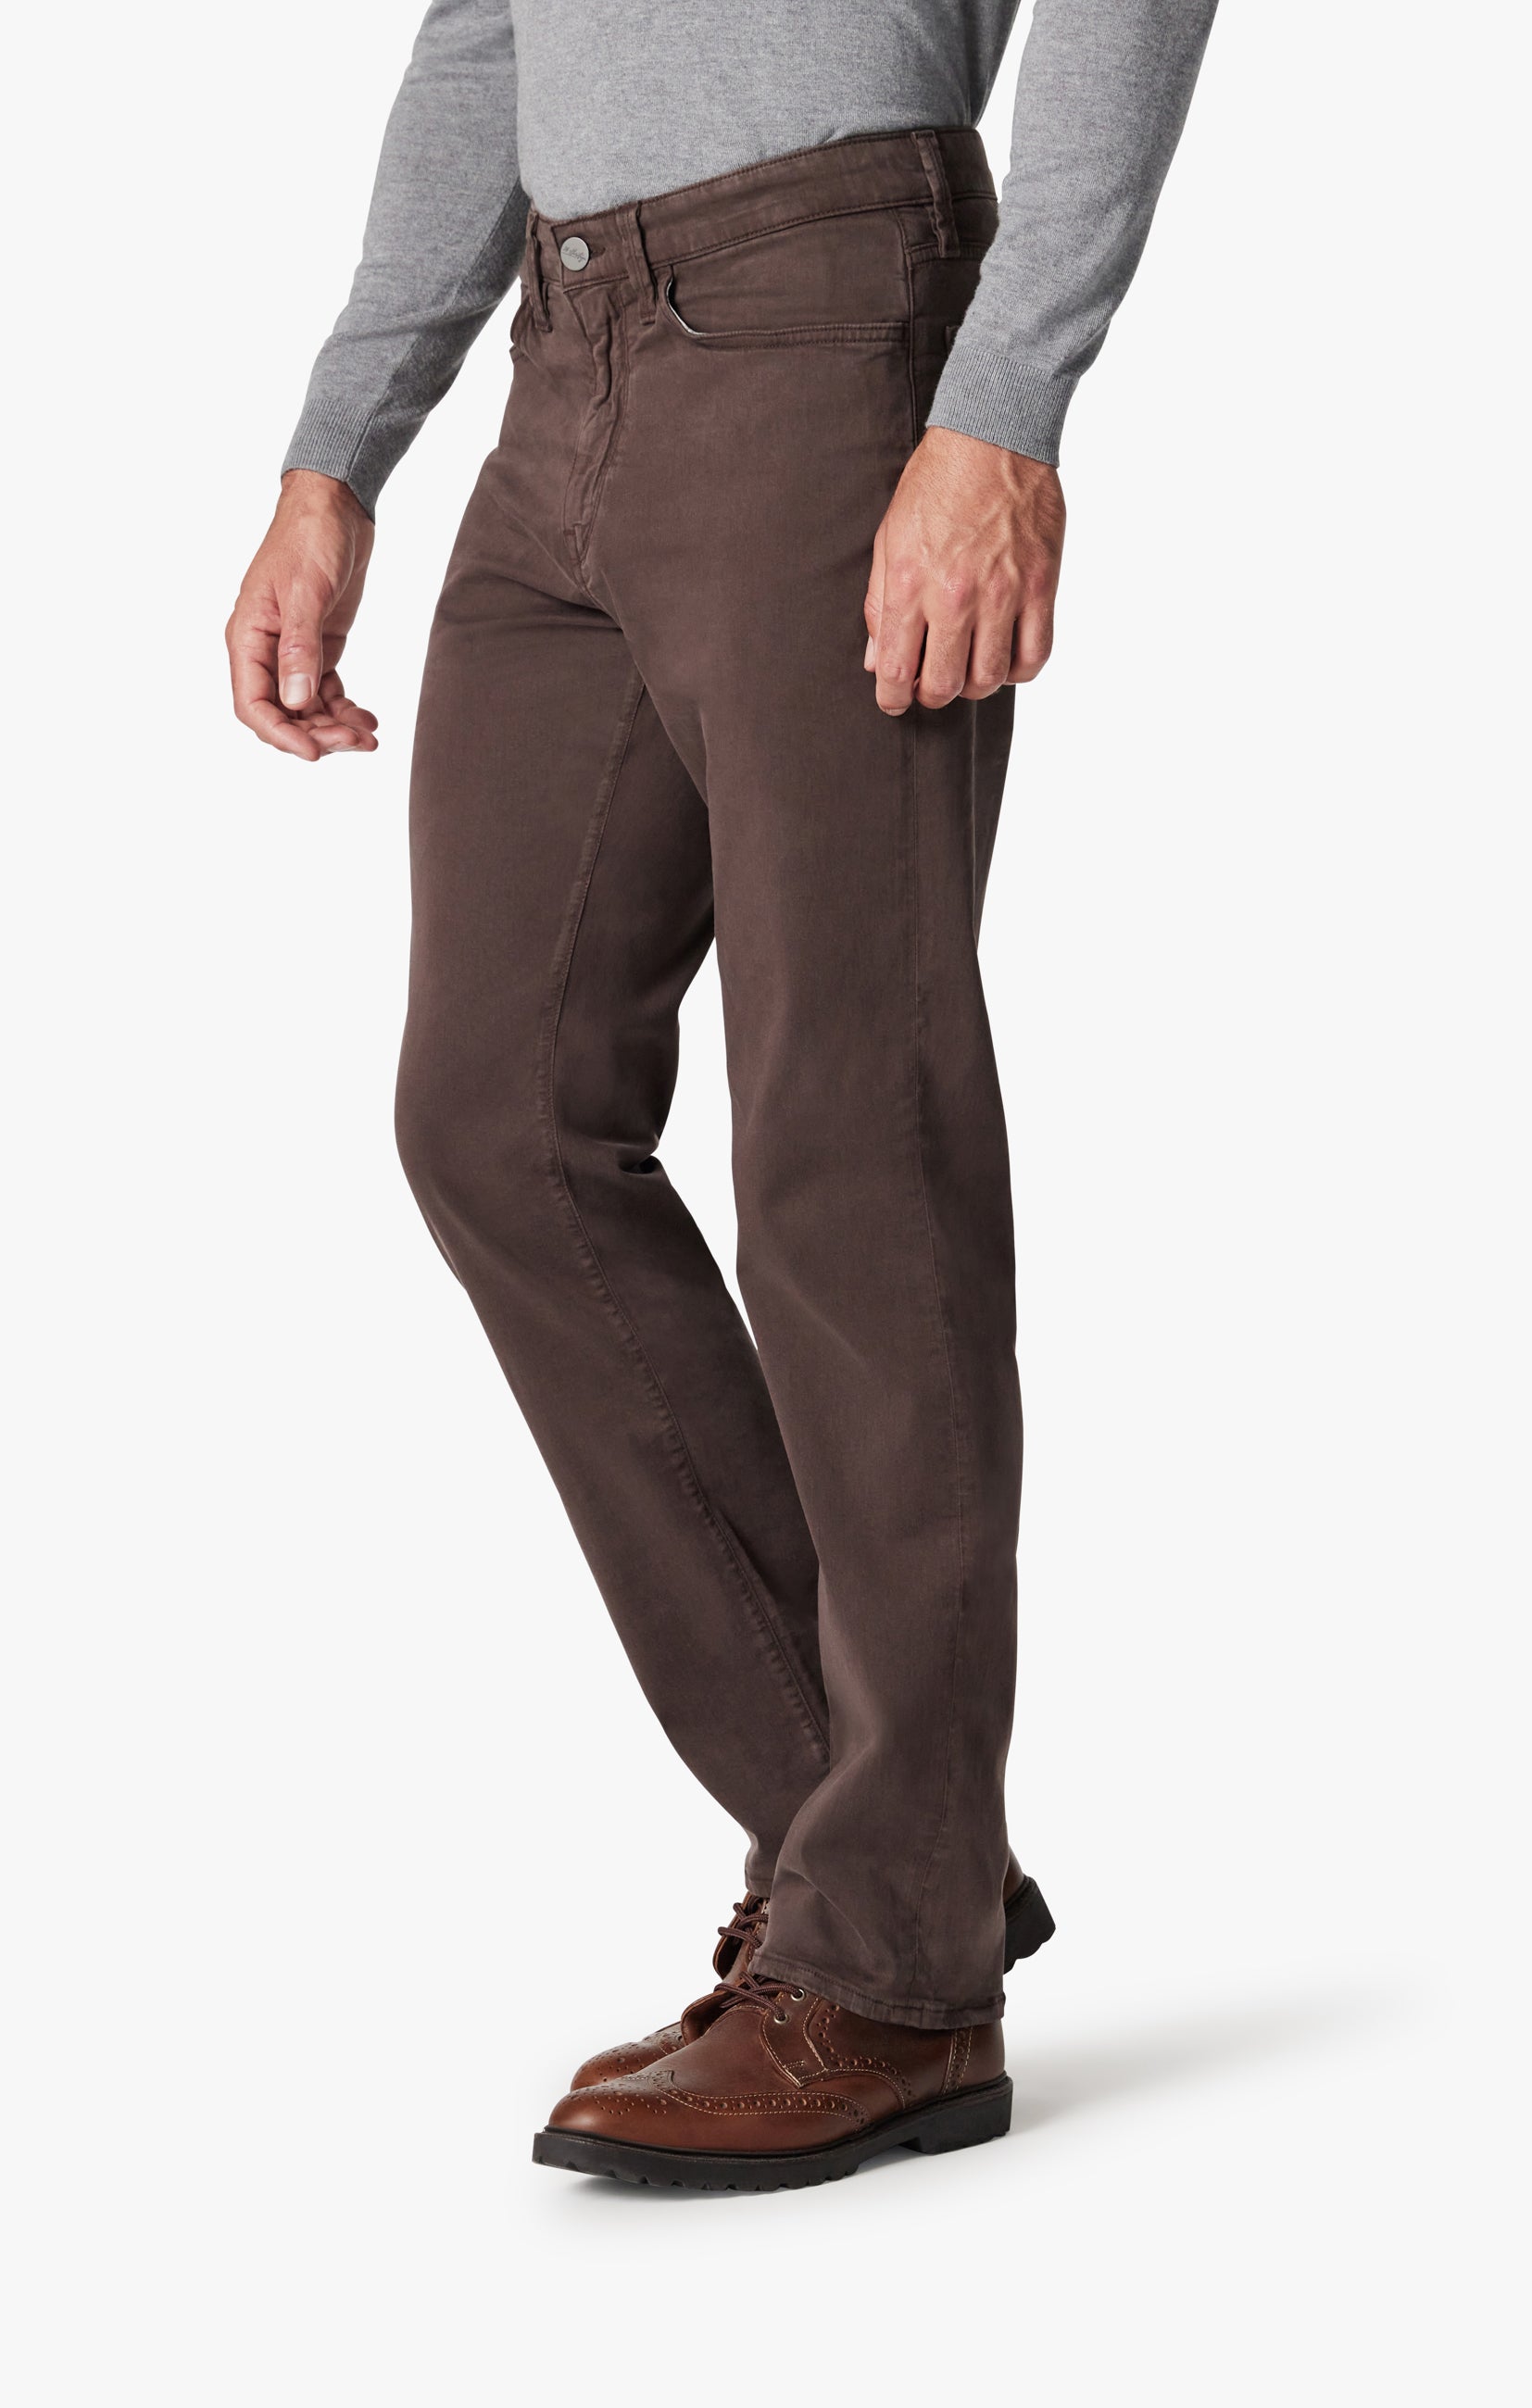 Charisma Relaxed Straight Leg Pants In Fudge Twill Image 3